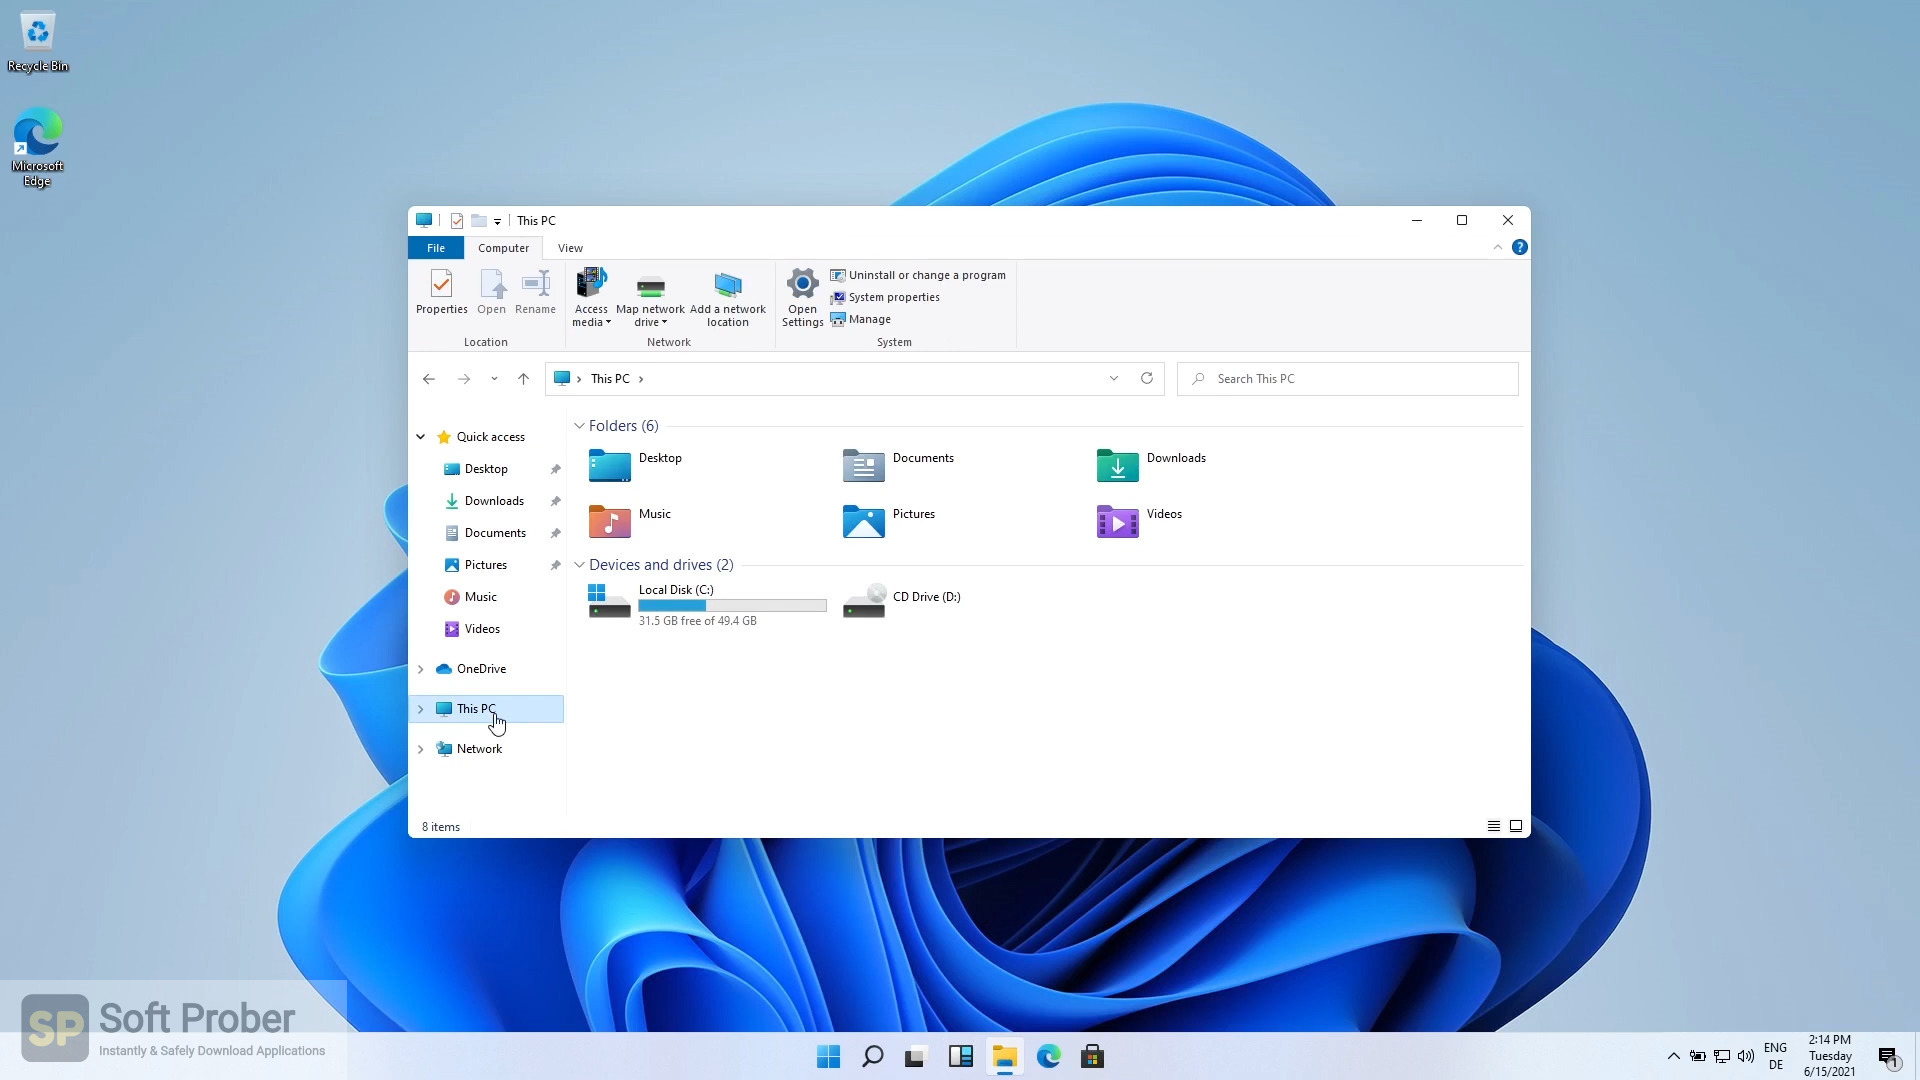 winrar for windows 11 free download